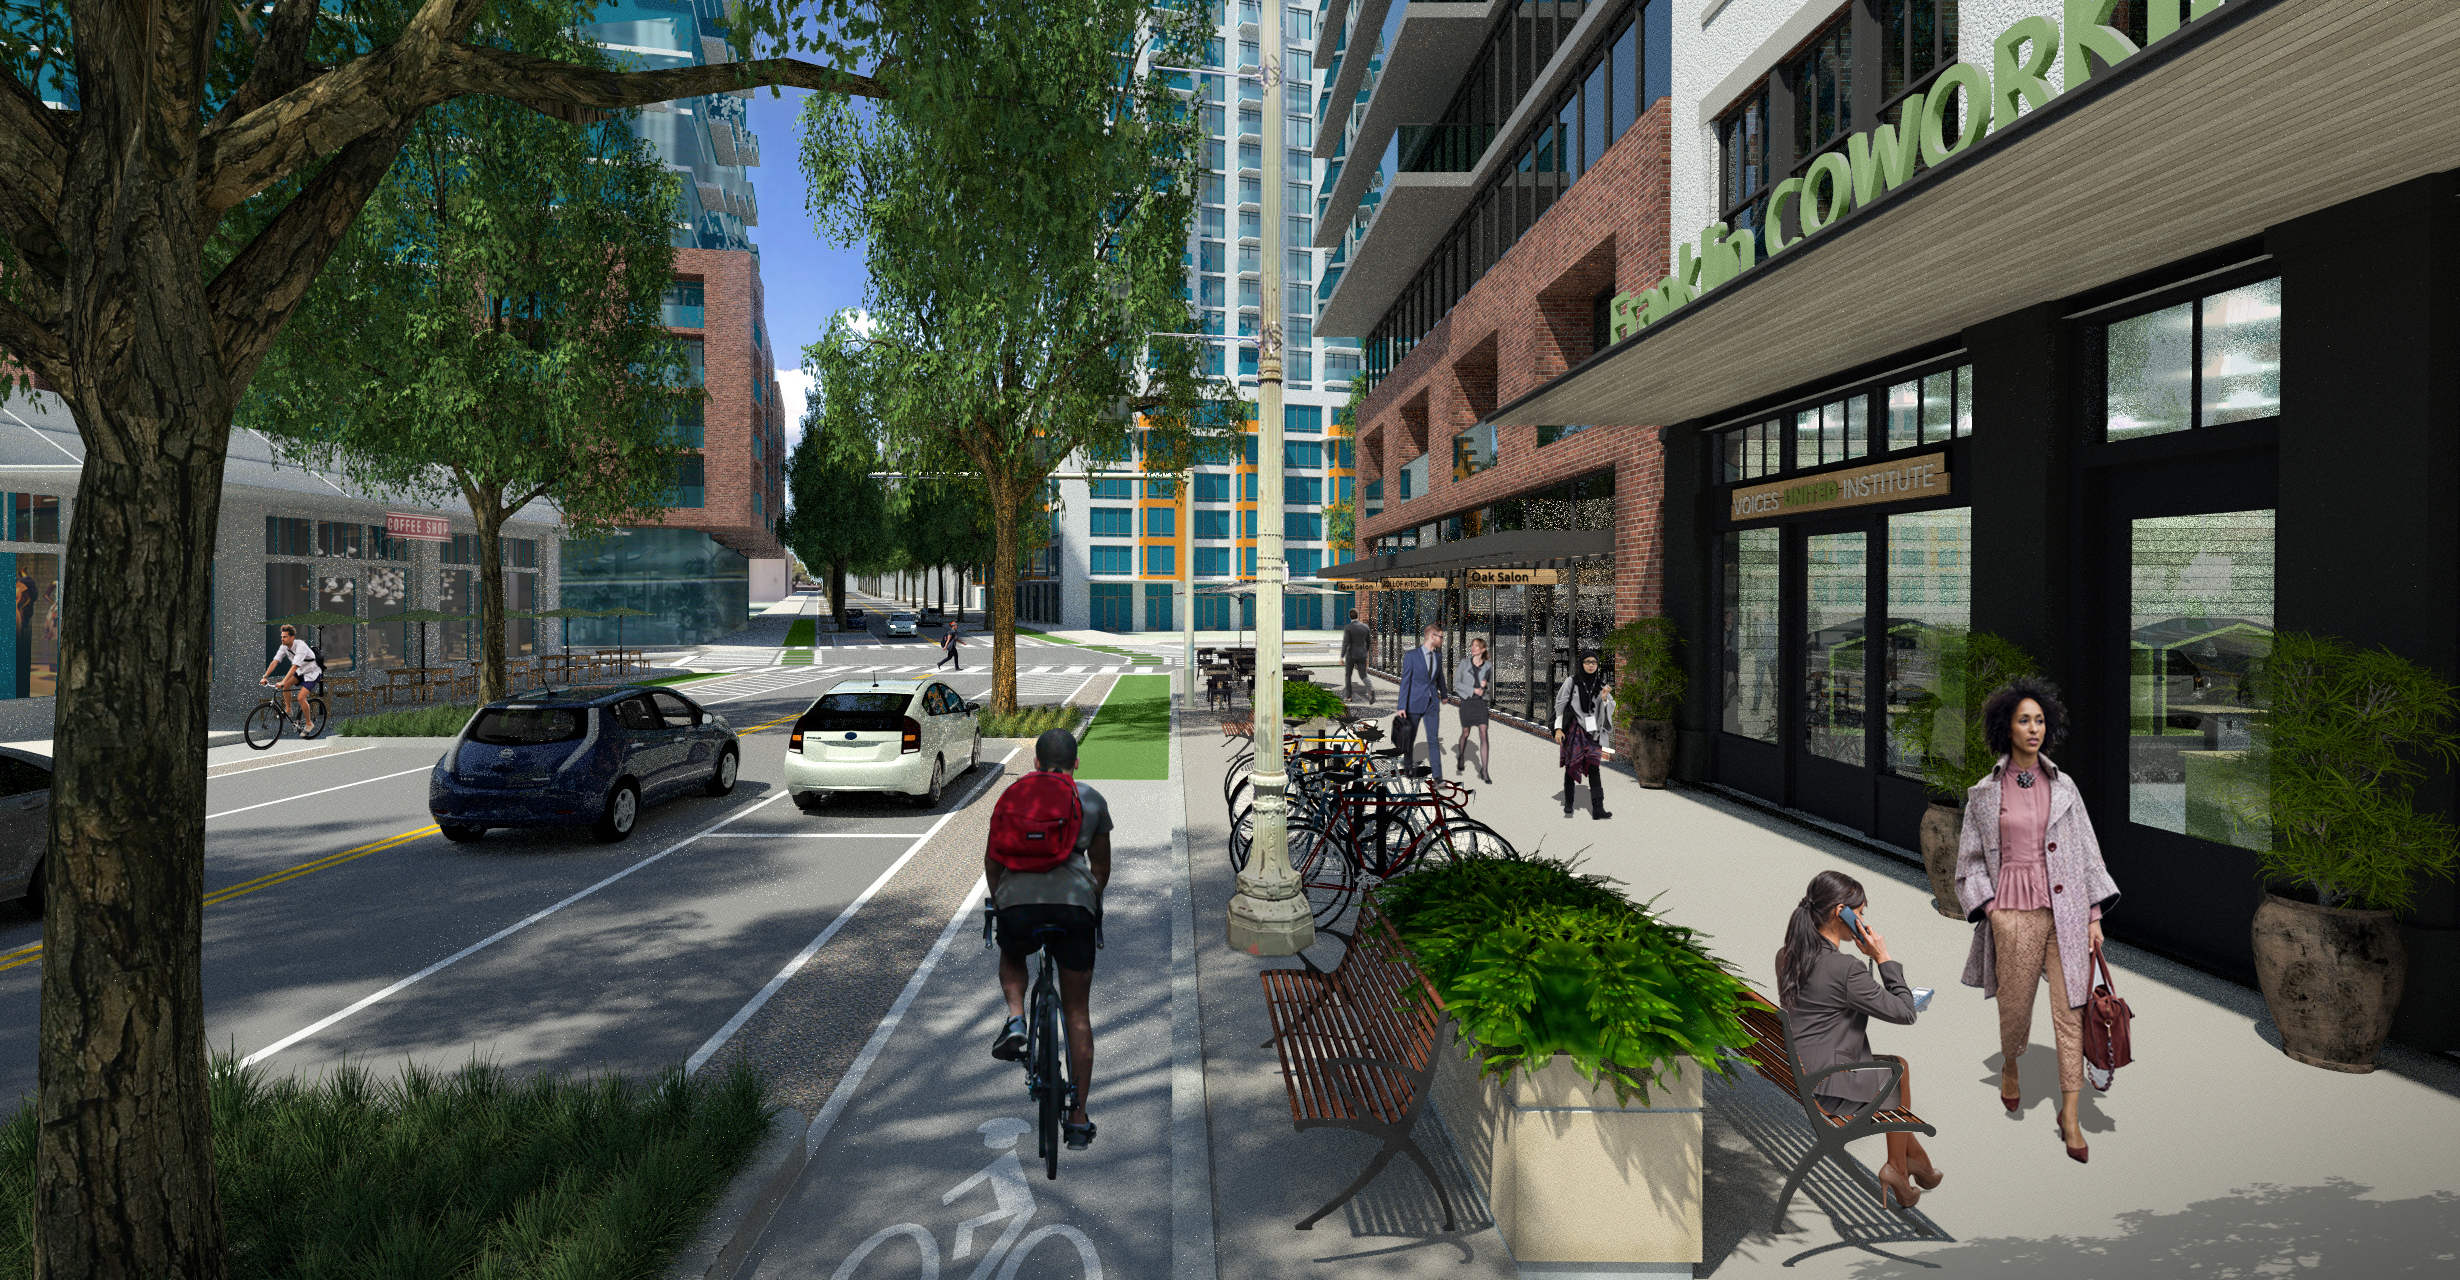 Rendering of Franklin Street in Downtown Oakland showing cyclists in protected bike lanes, people walking and sitting on benches on the sidewalk, and new storefronts.